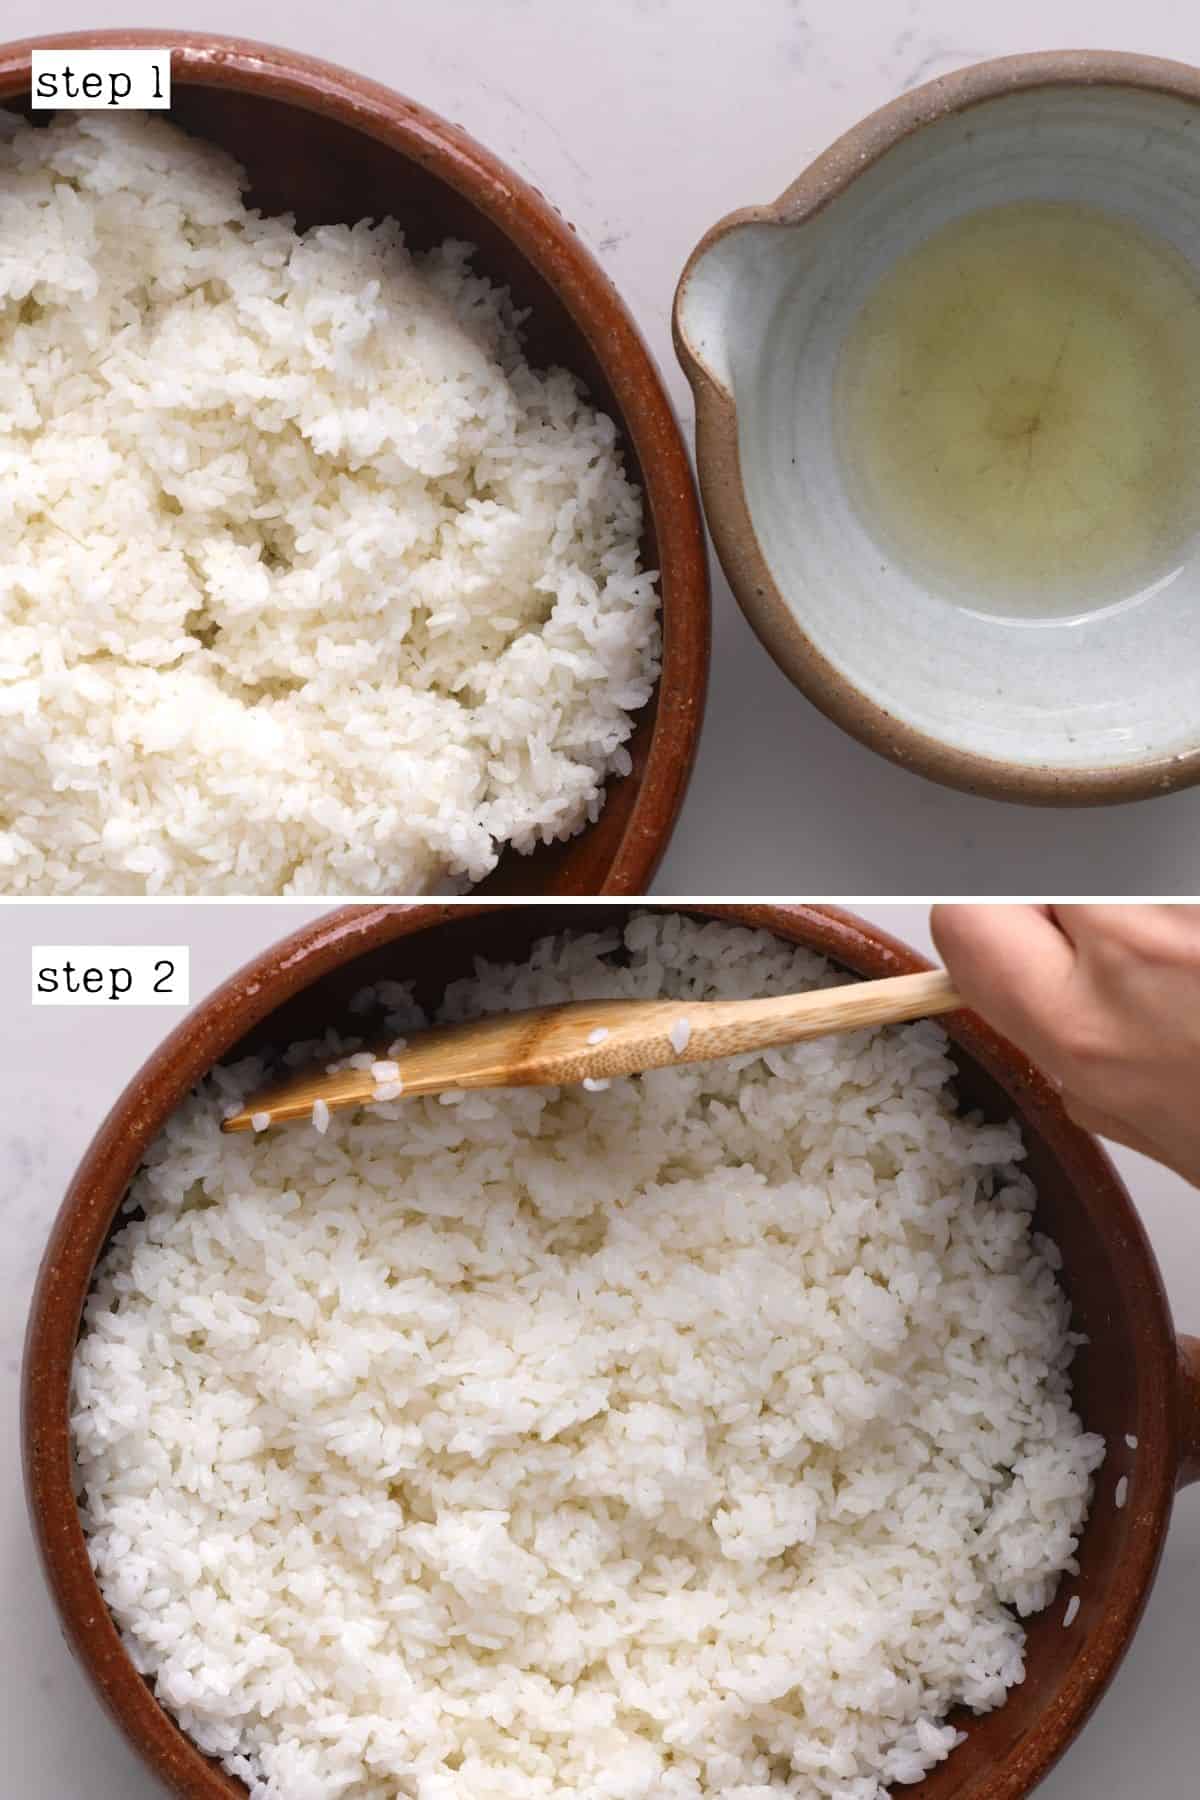 Steps for mixing sushi rice with vinegar